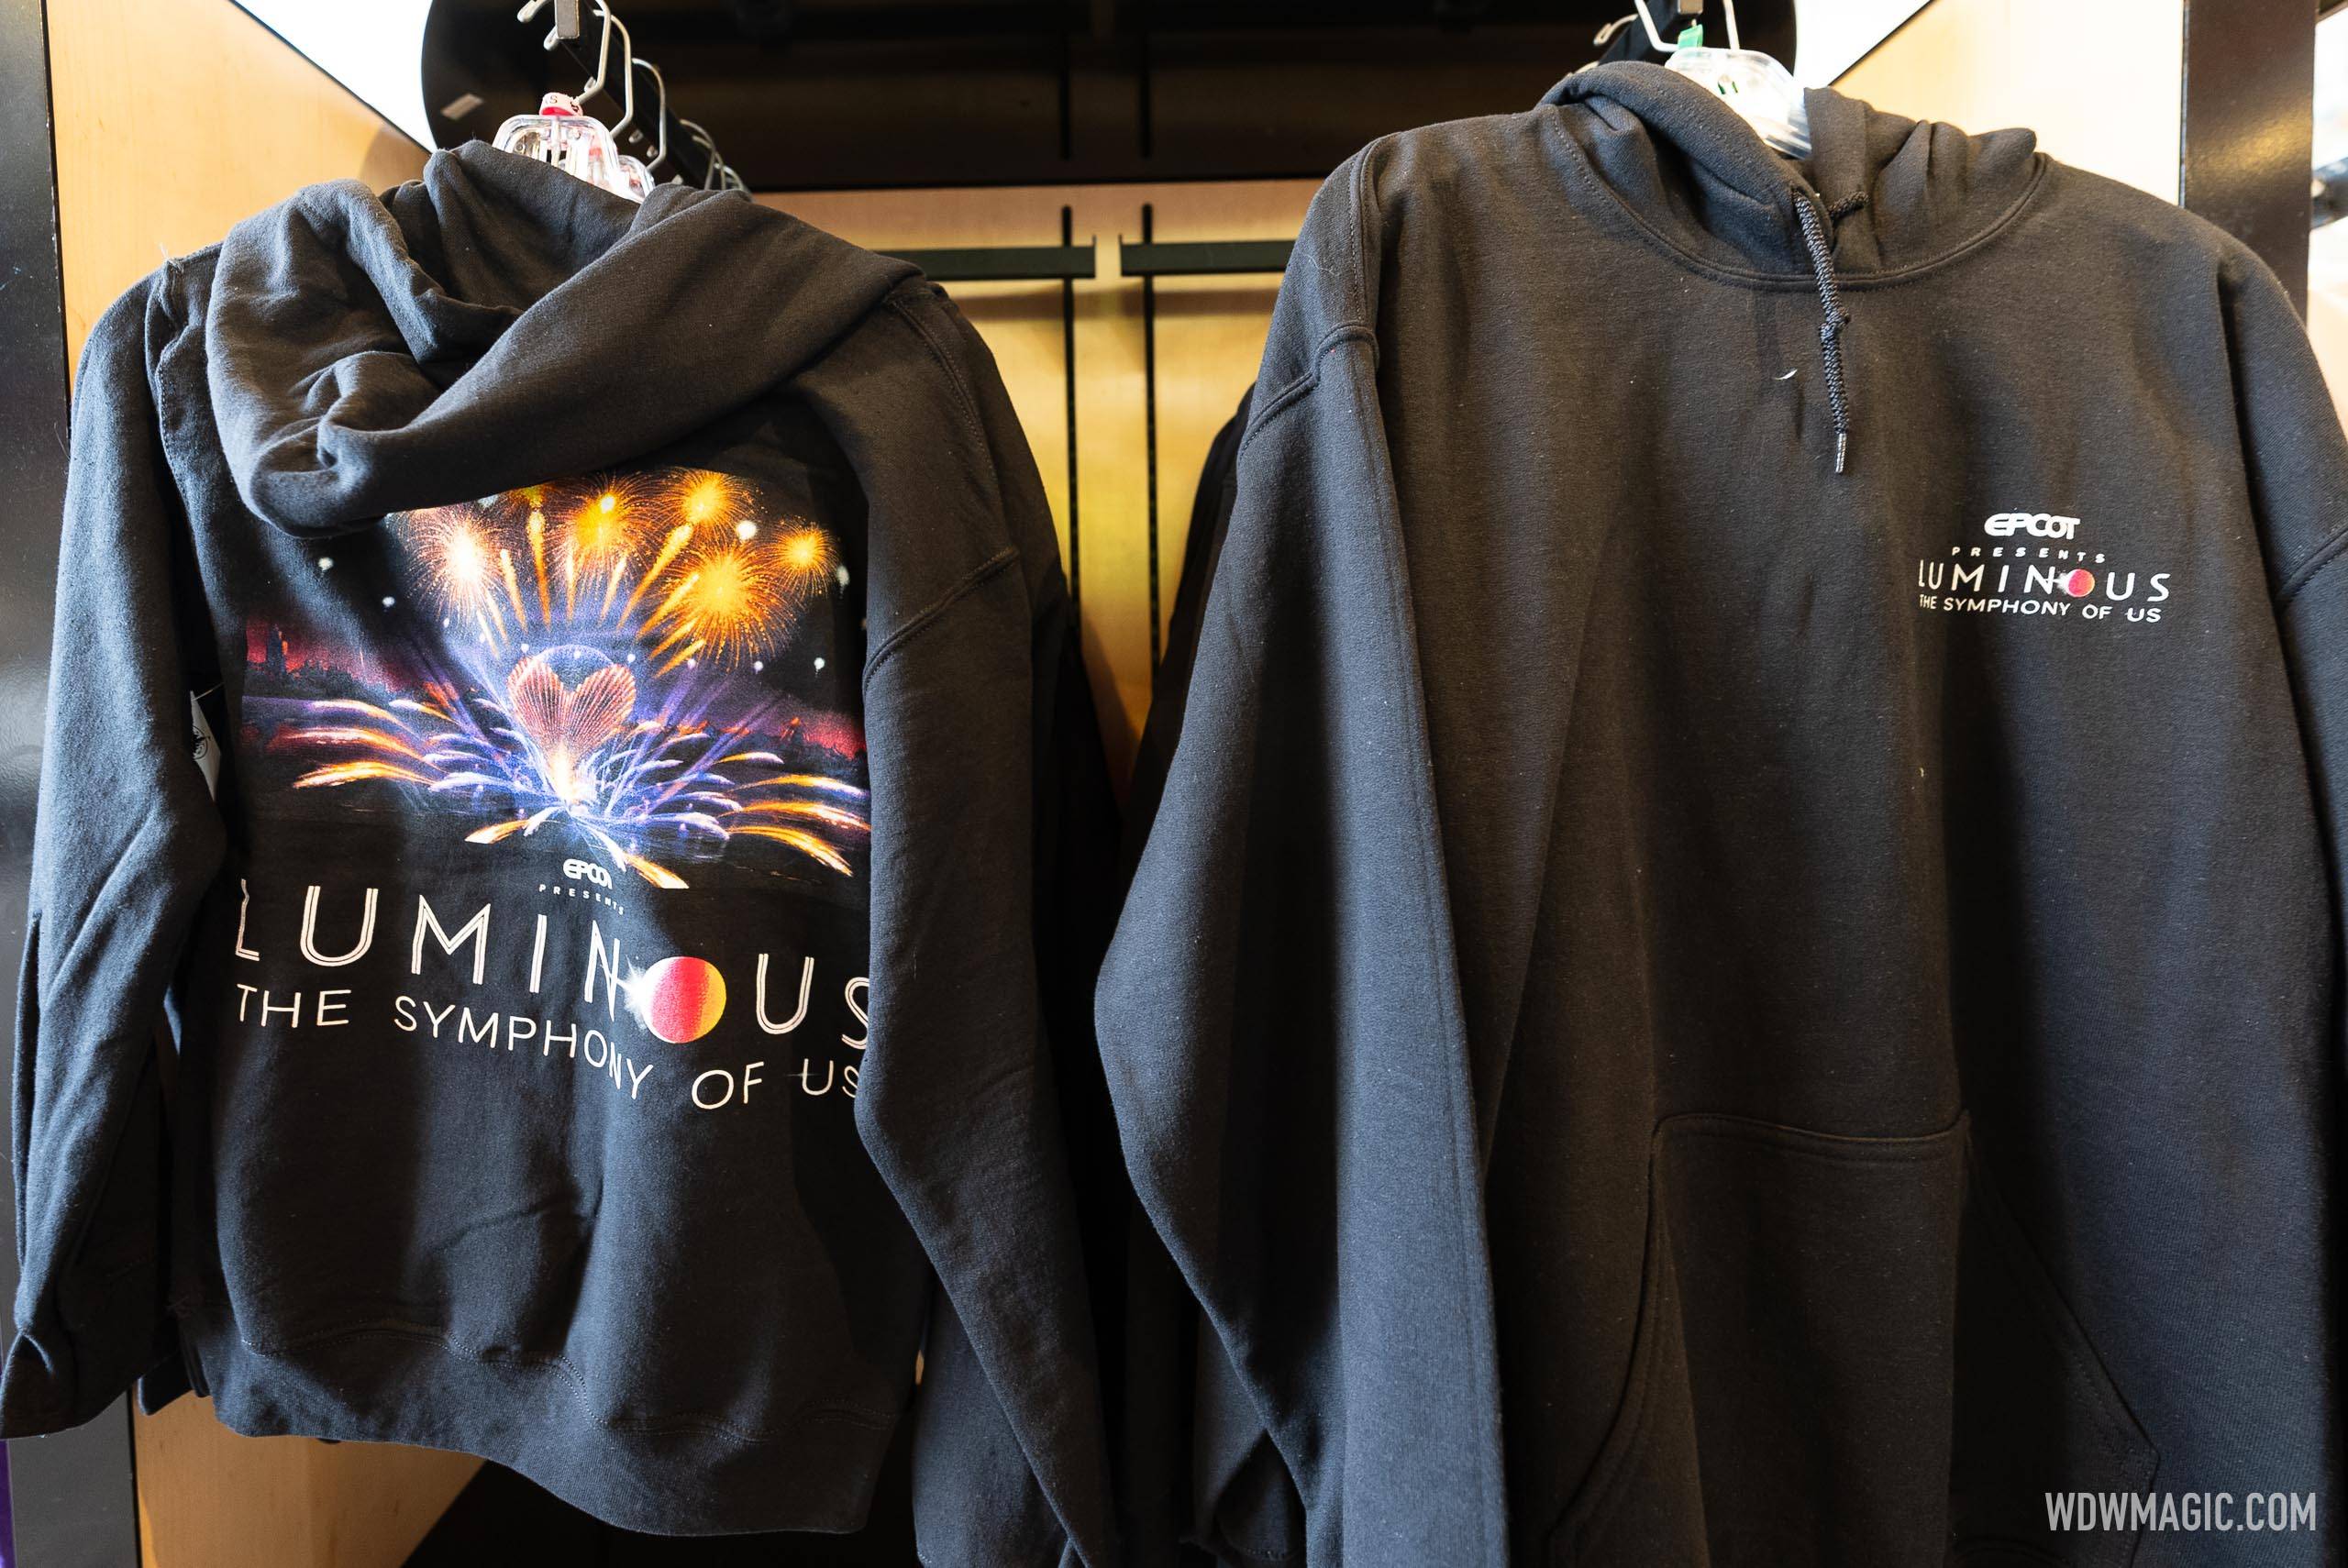 Luminous the Symphony of Us merchandise now available at EPCOT